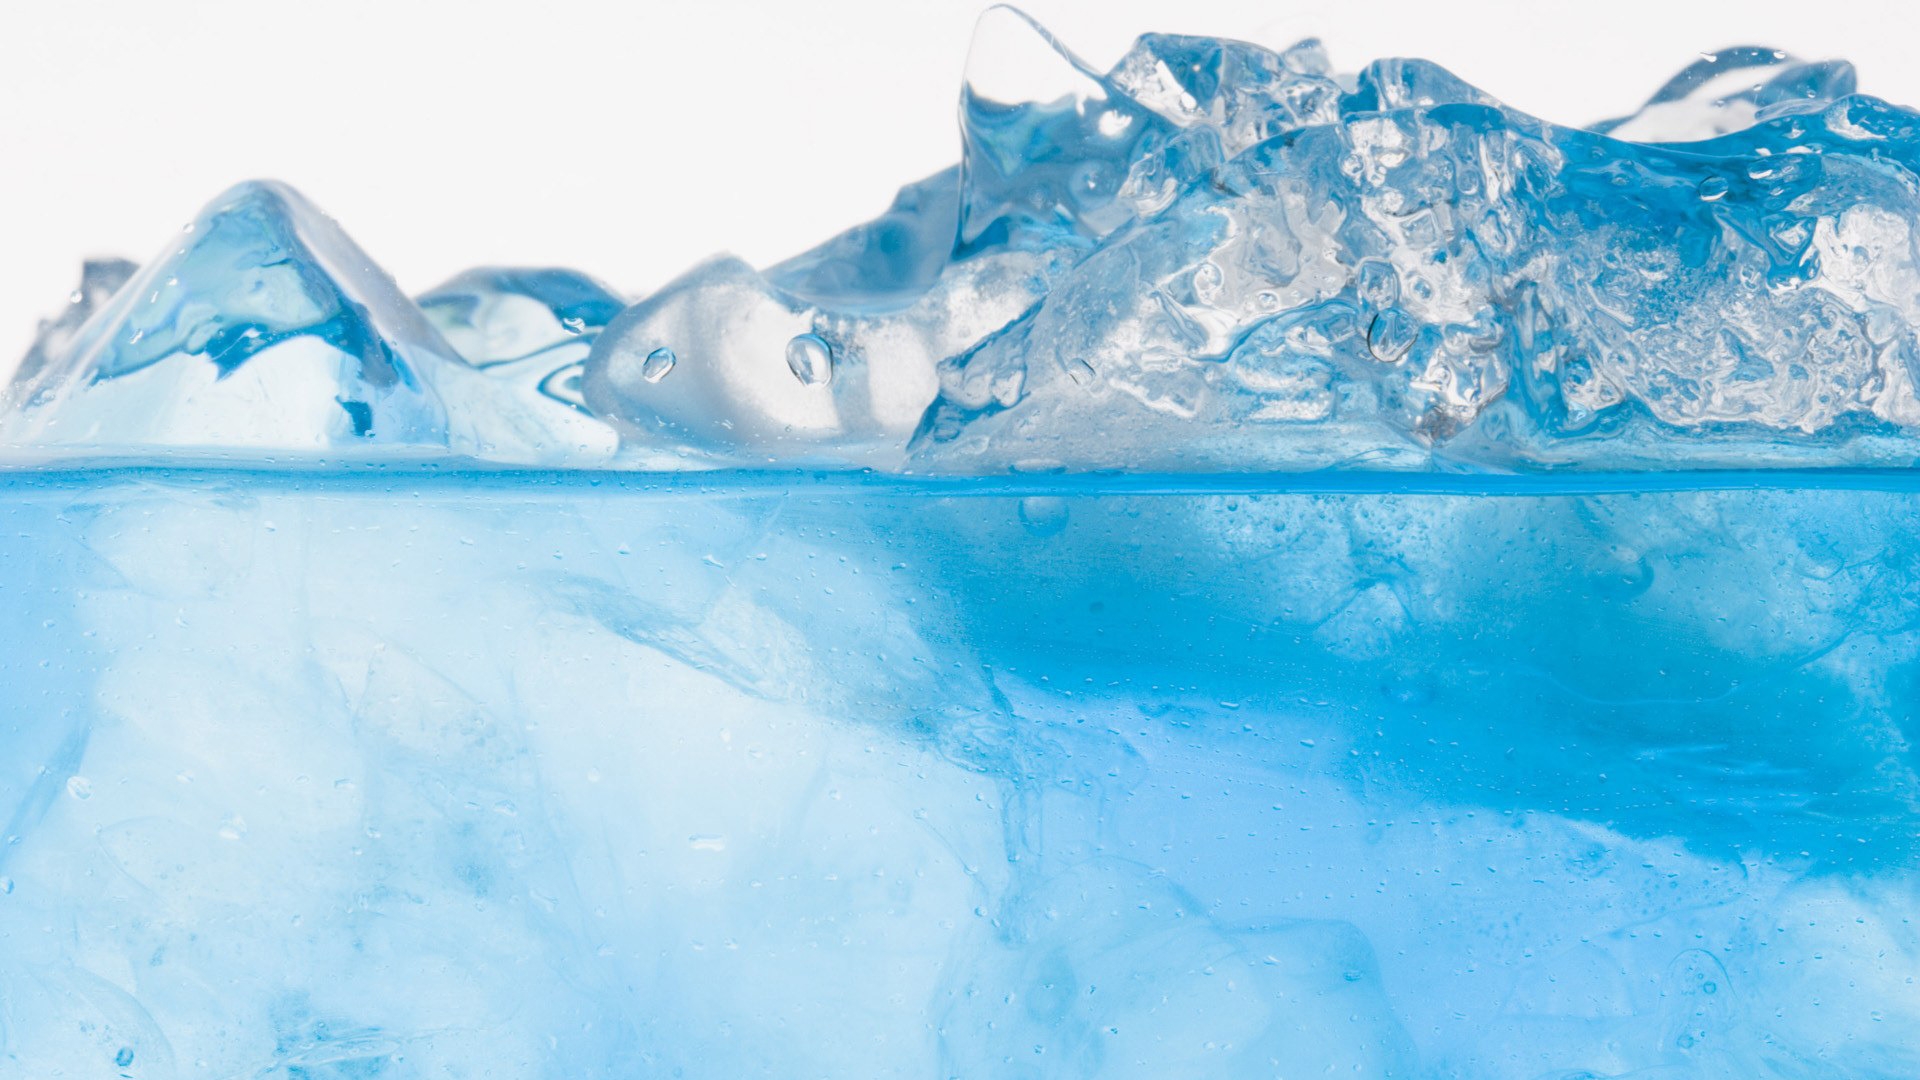 Blue Crystal Ice for 1920 x 1080 HDTV 1080p resolution